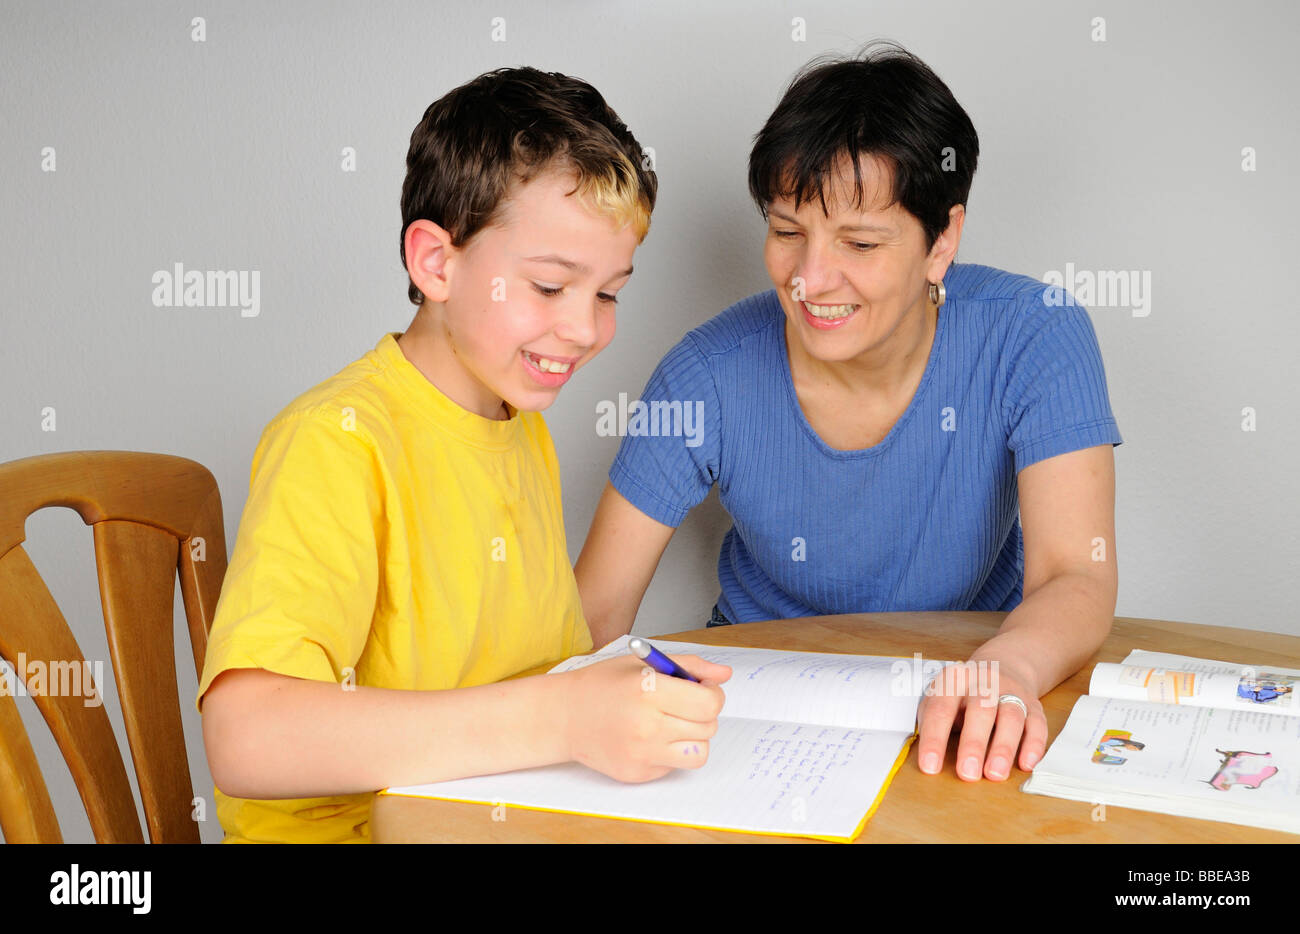 Boy doing homework for school, mother helping him, both laughing Stock Photo